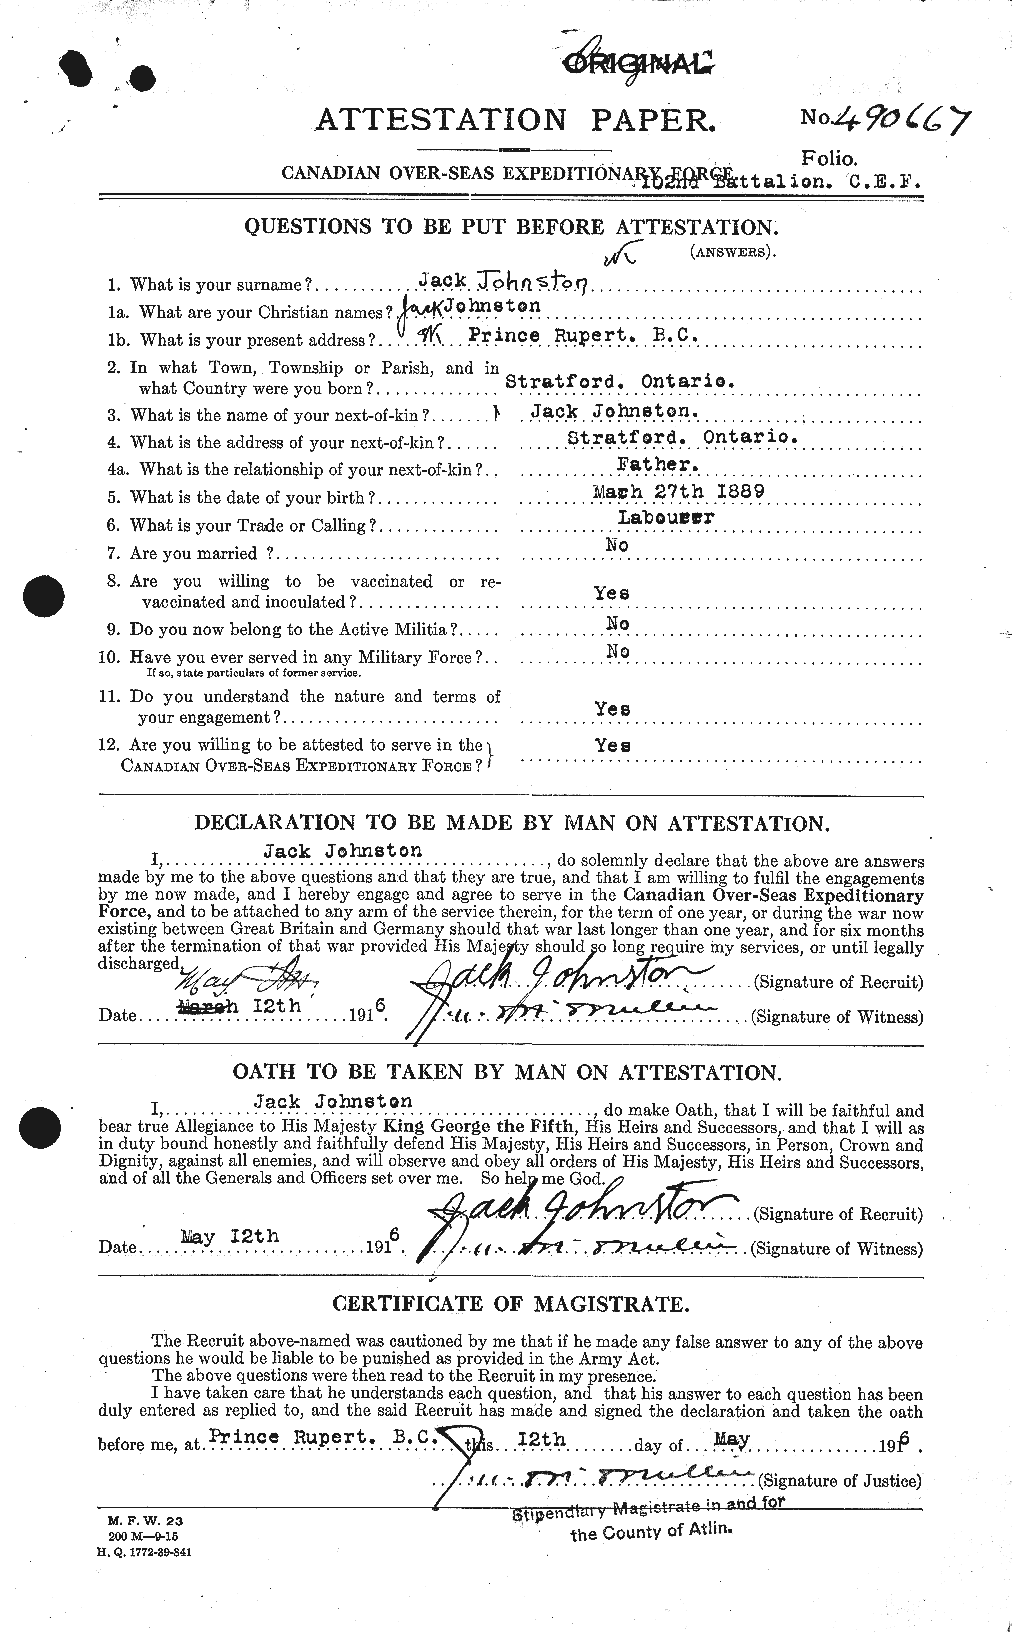 Personnel Records of the First World War - CEF 422680a